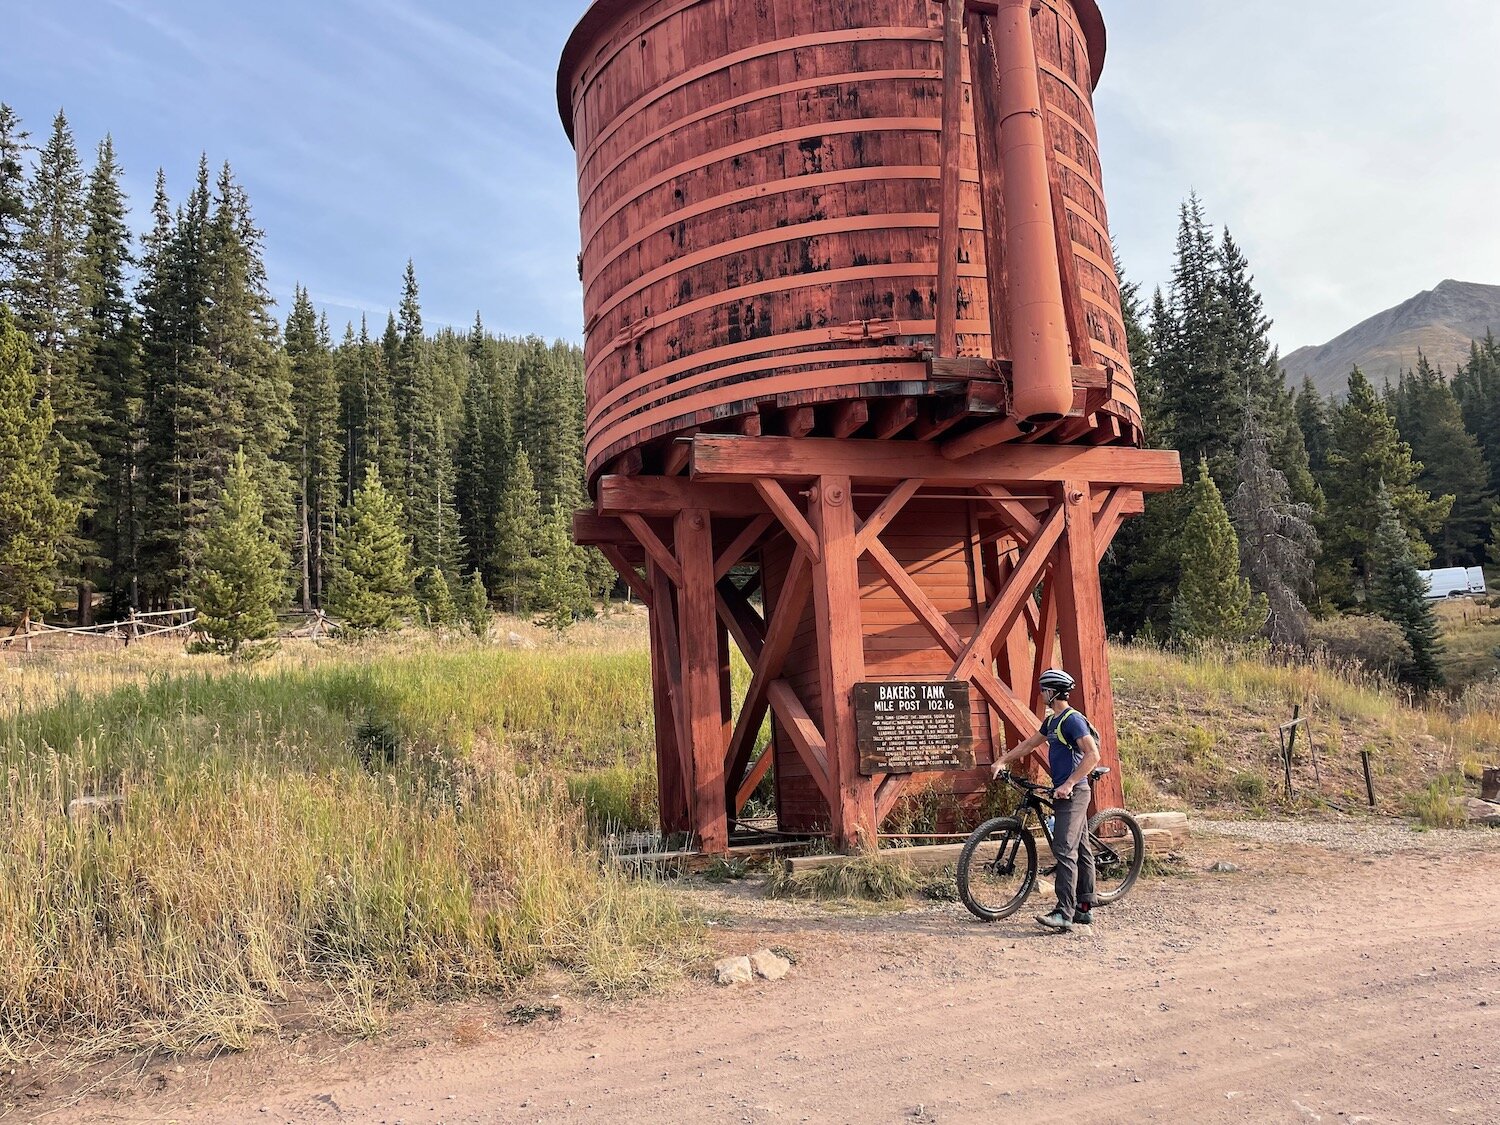 Baker's tank on top of boreas pass rd right outside of breckenridge